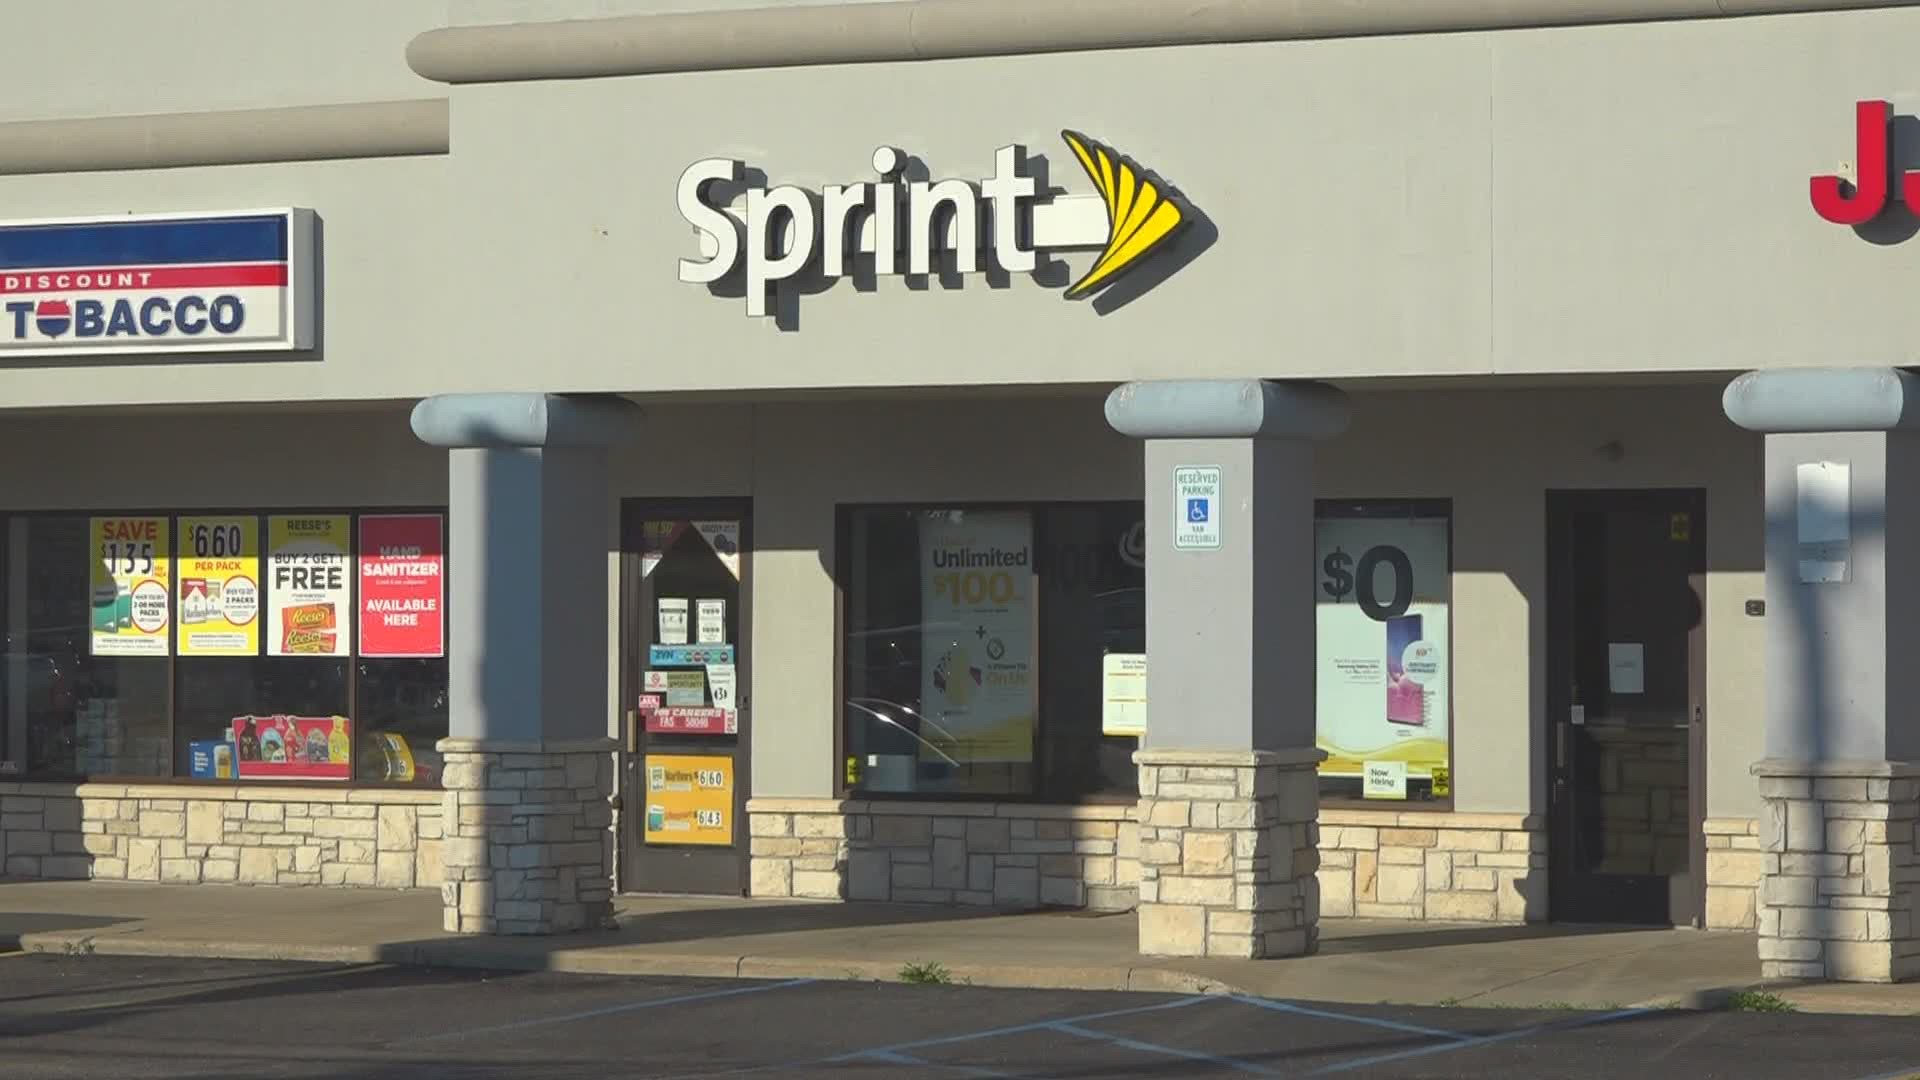 Police in Holland looking for 4 suspects after Sprint store robbery